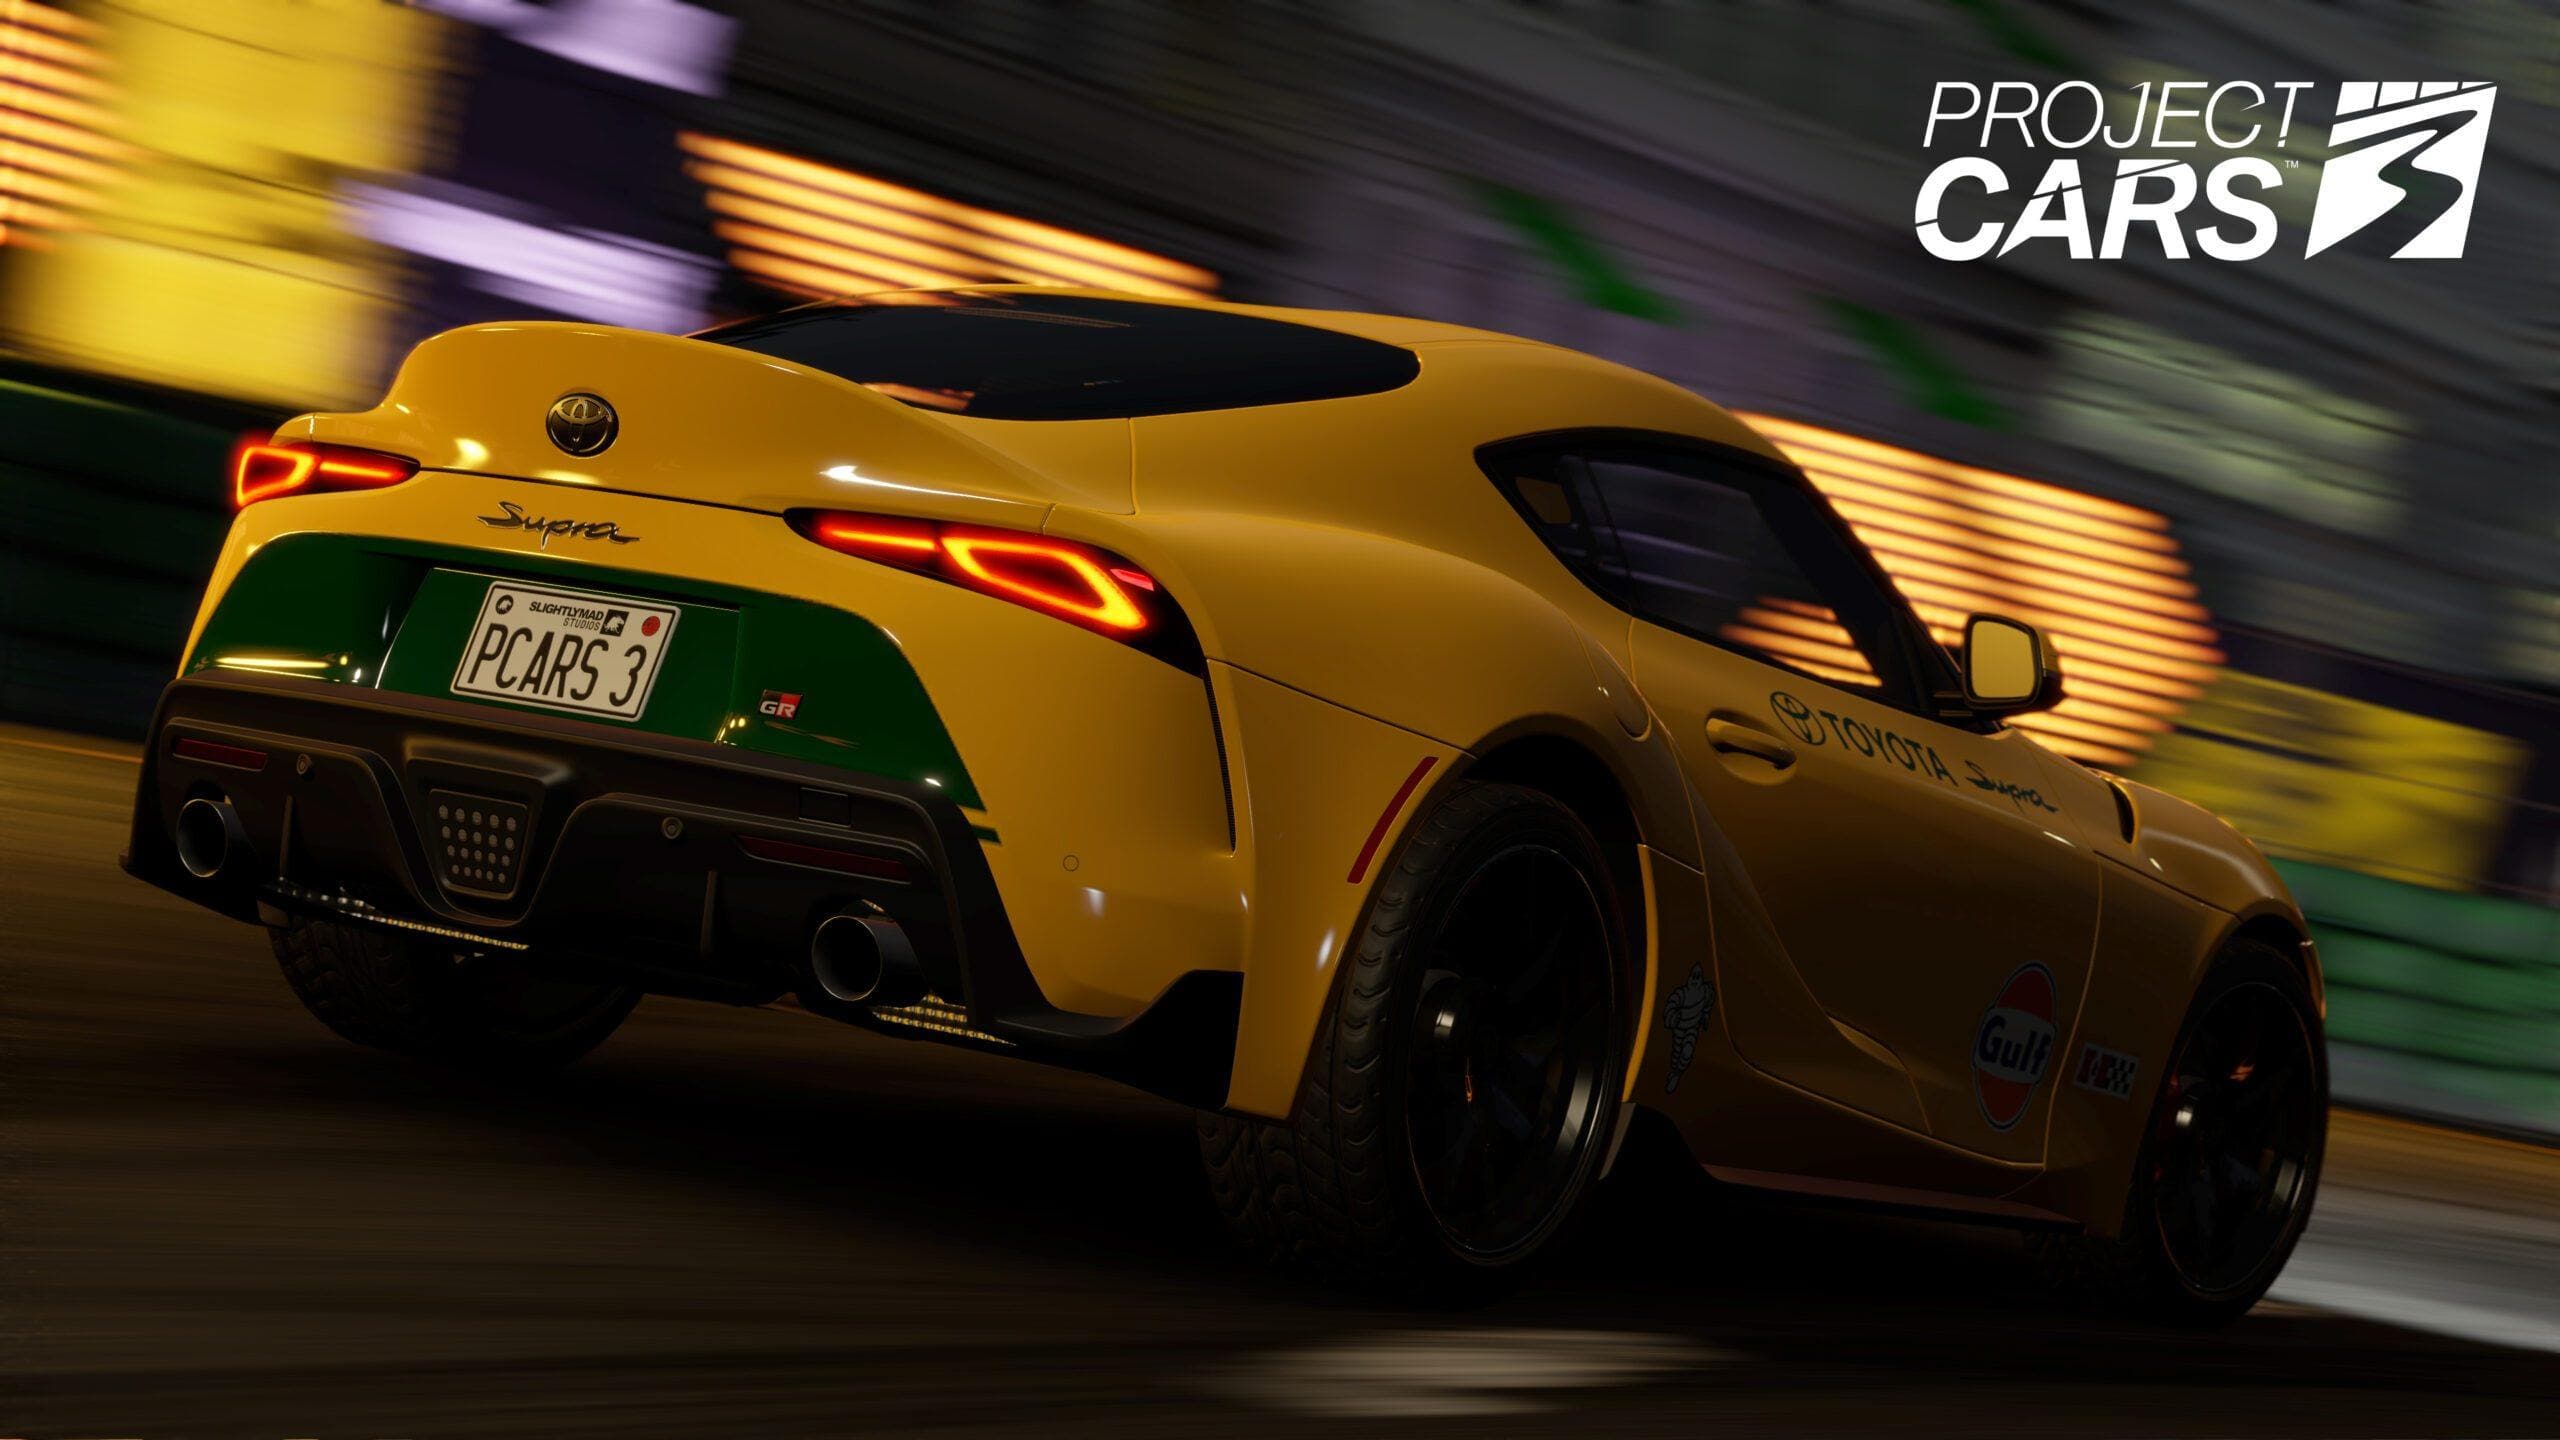 Project-Cars-3-Preview-01-Header-scaled